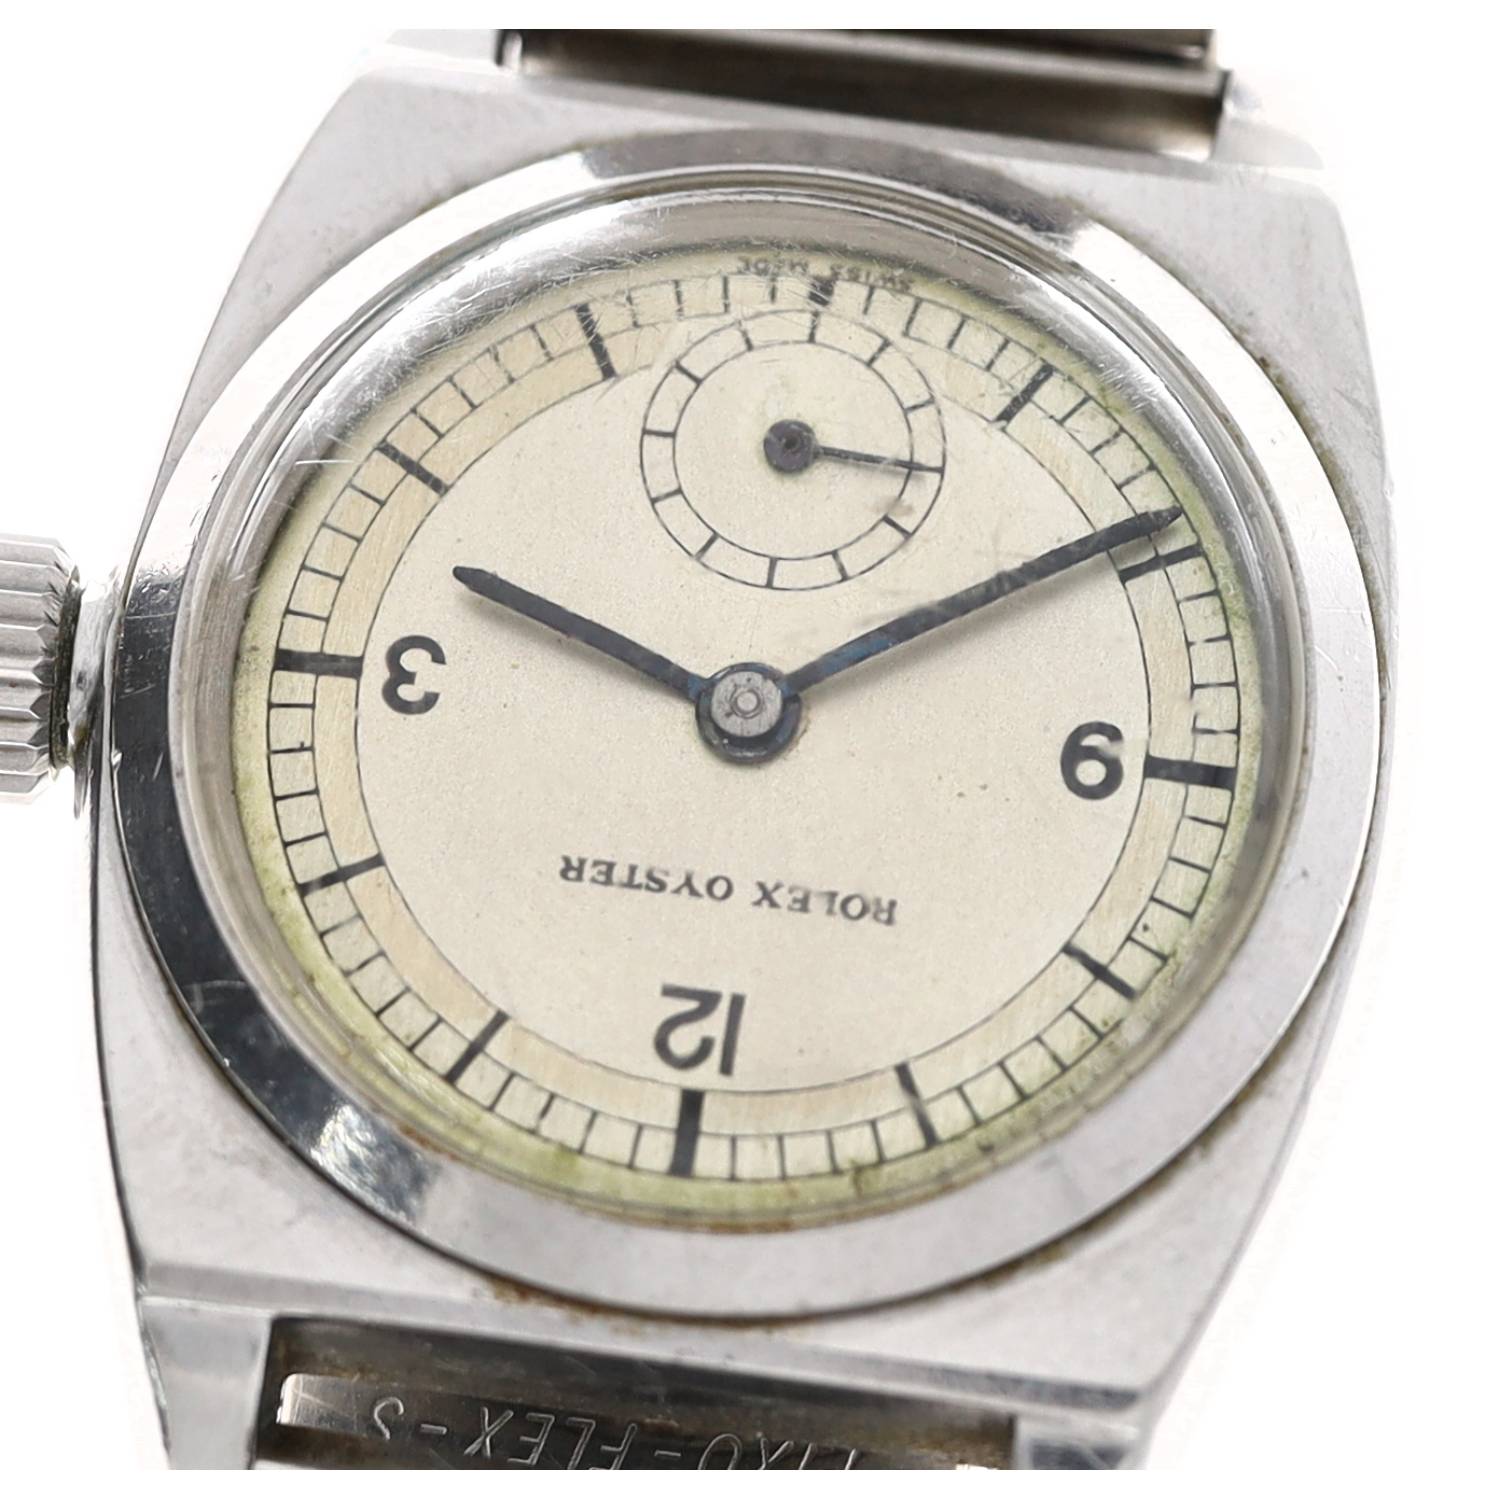 Rolex Oyster mid-size stainless steel gentleman's wristwatch, reference no. 2574, case no. 2343xx, - Image 6 of 6